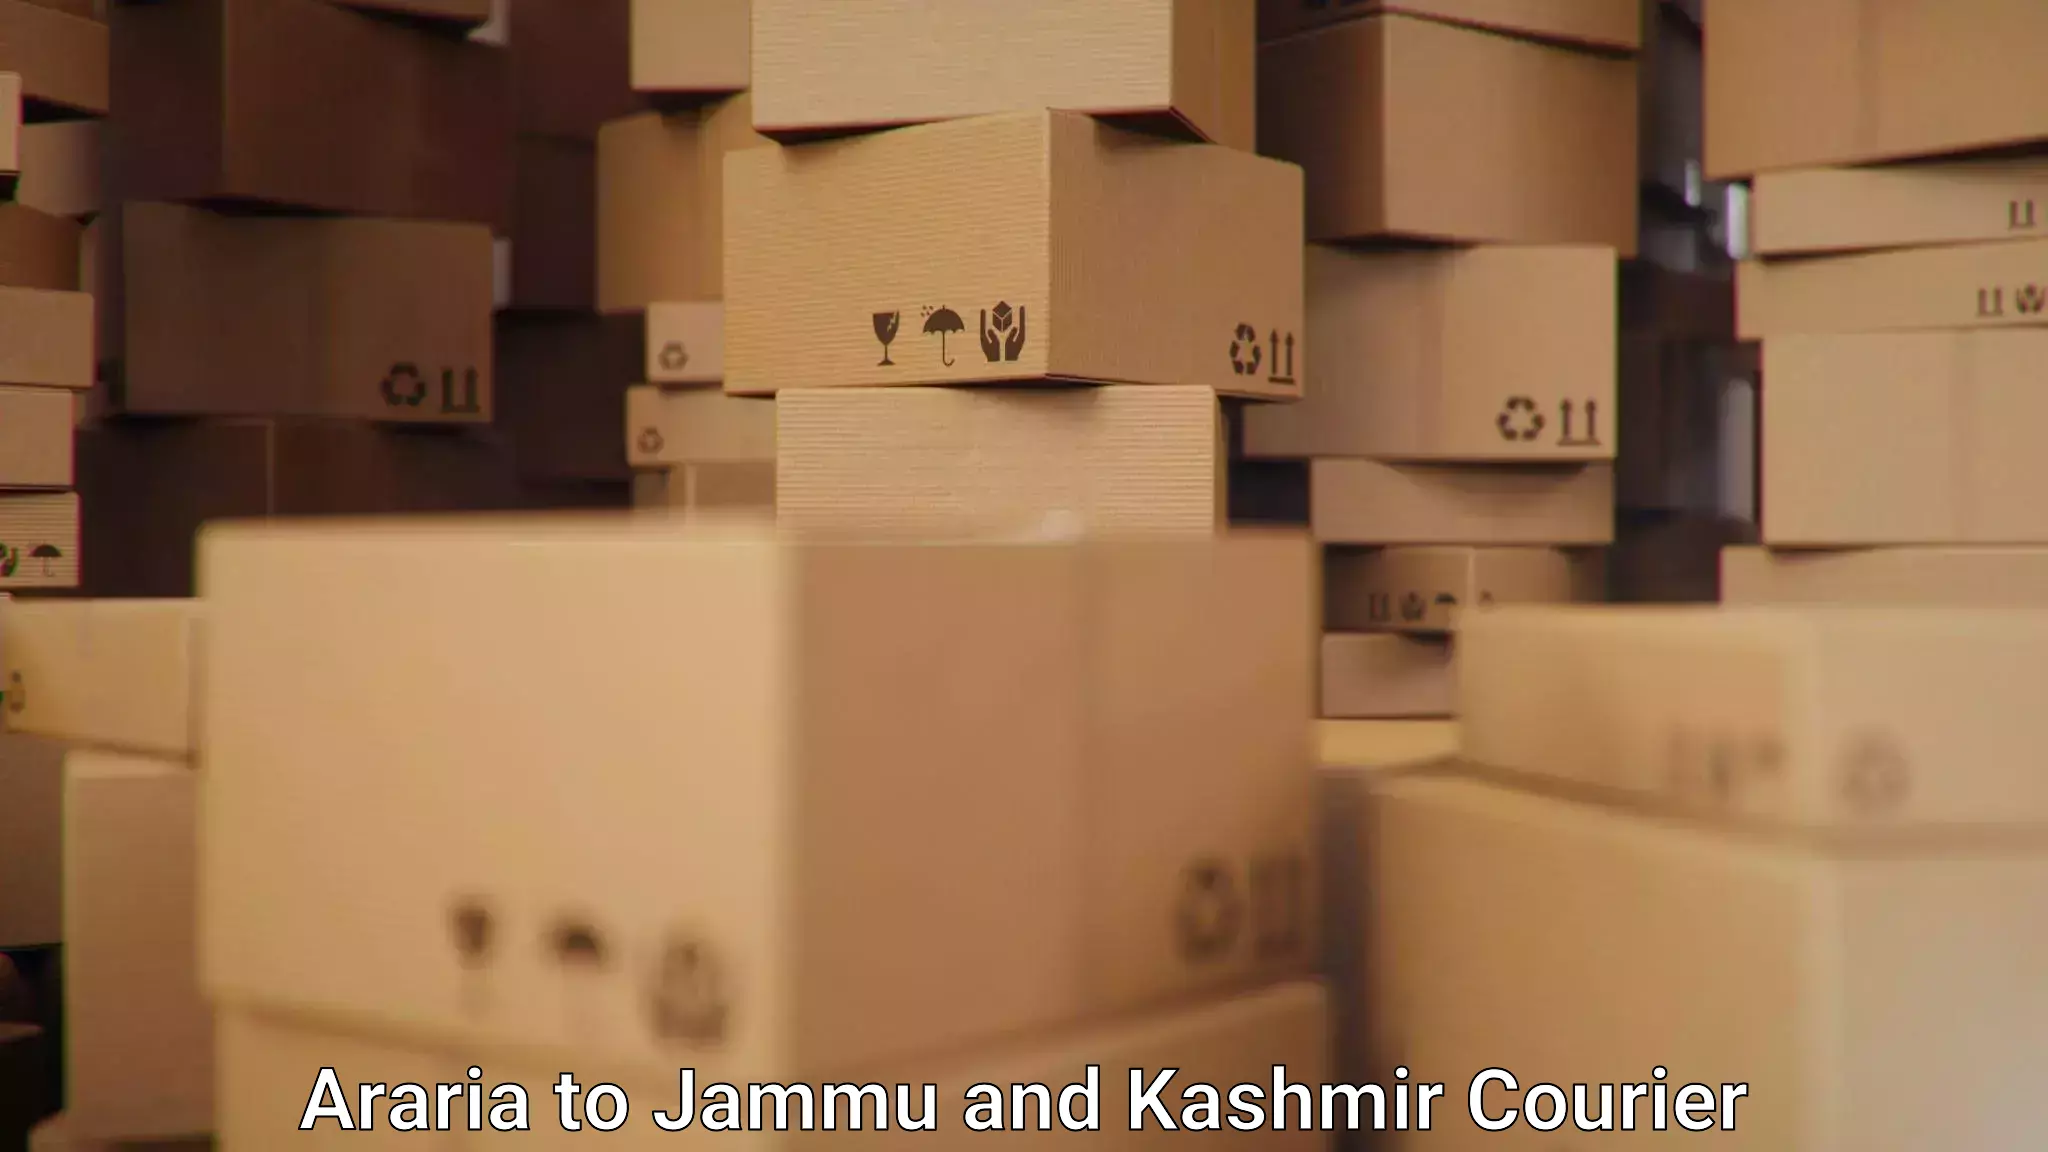 Multi-carrier shipping Araria to Baramulla